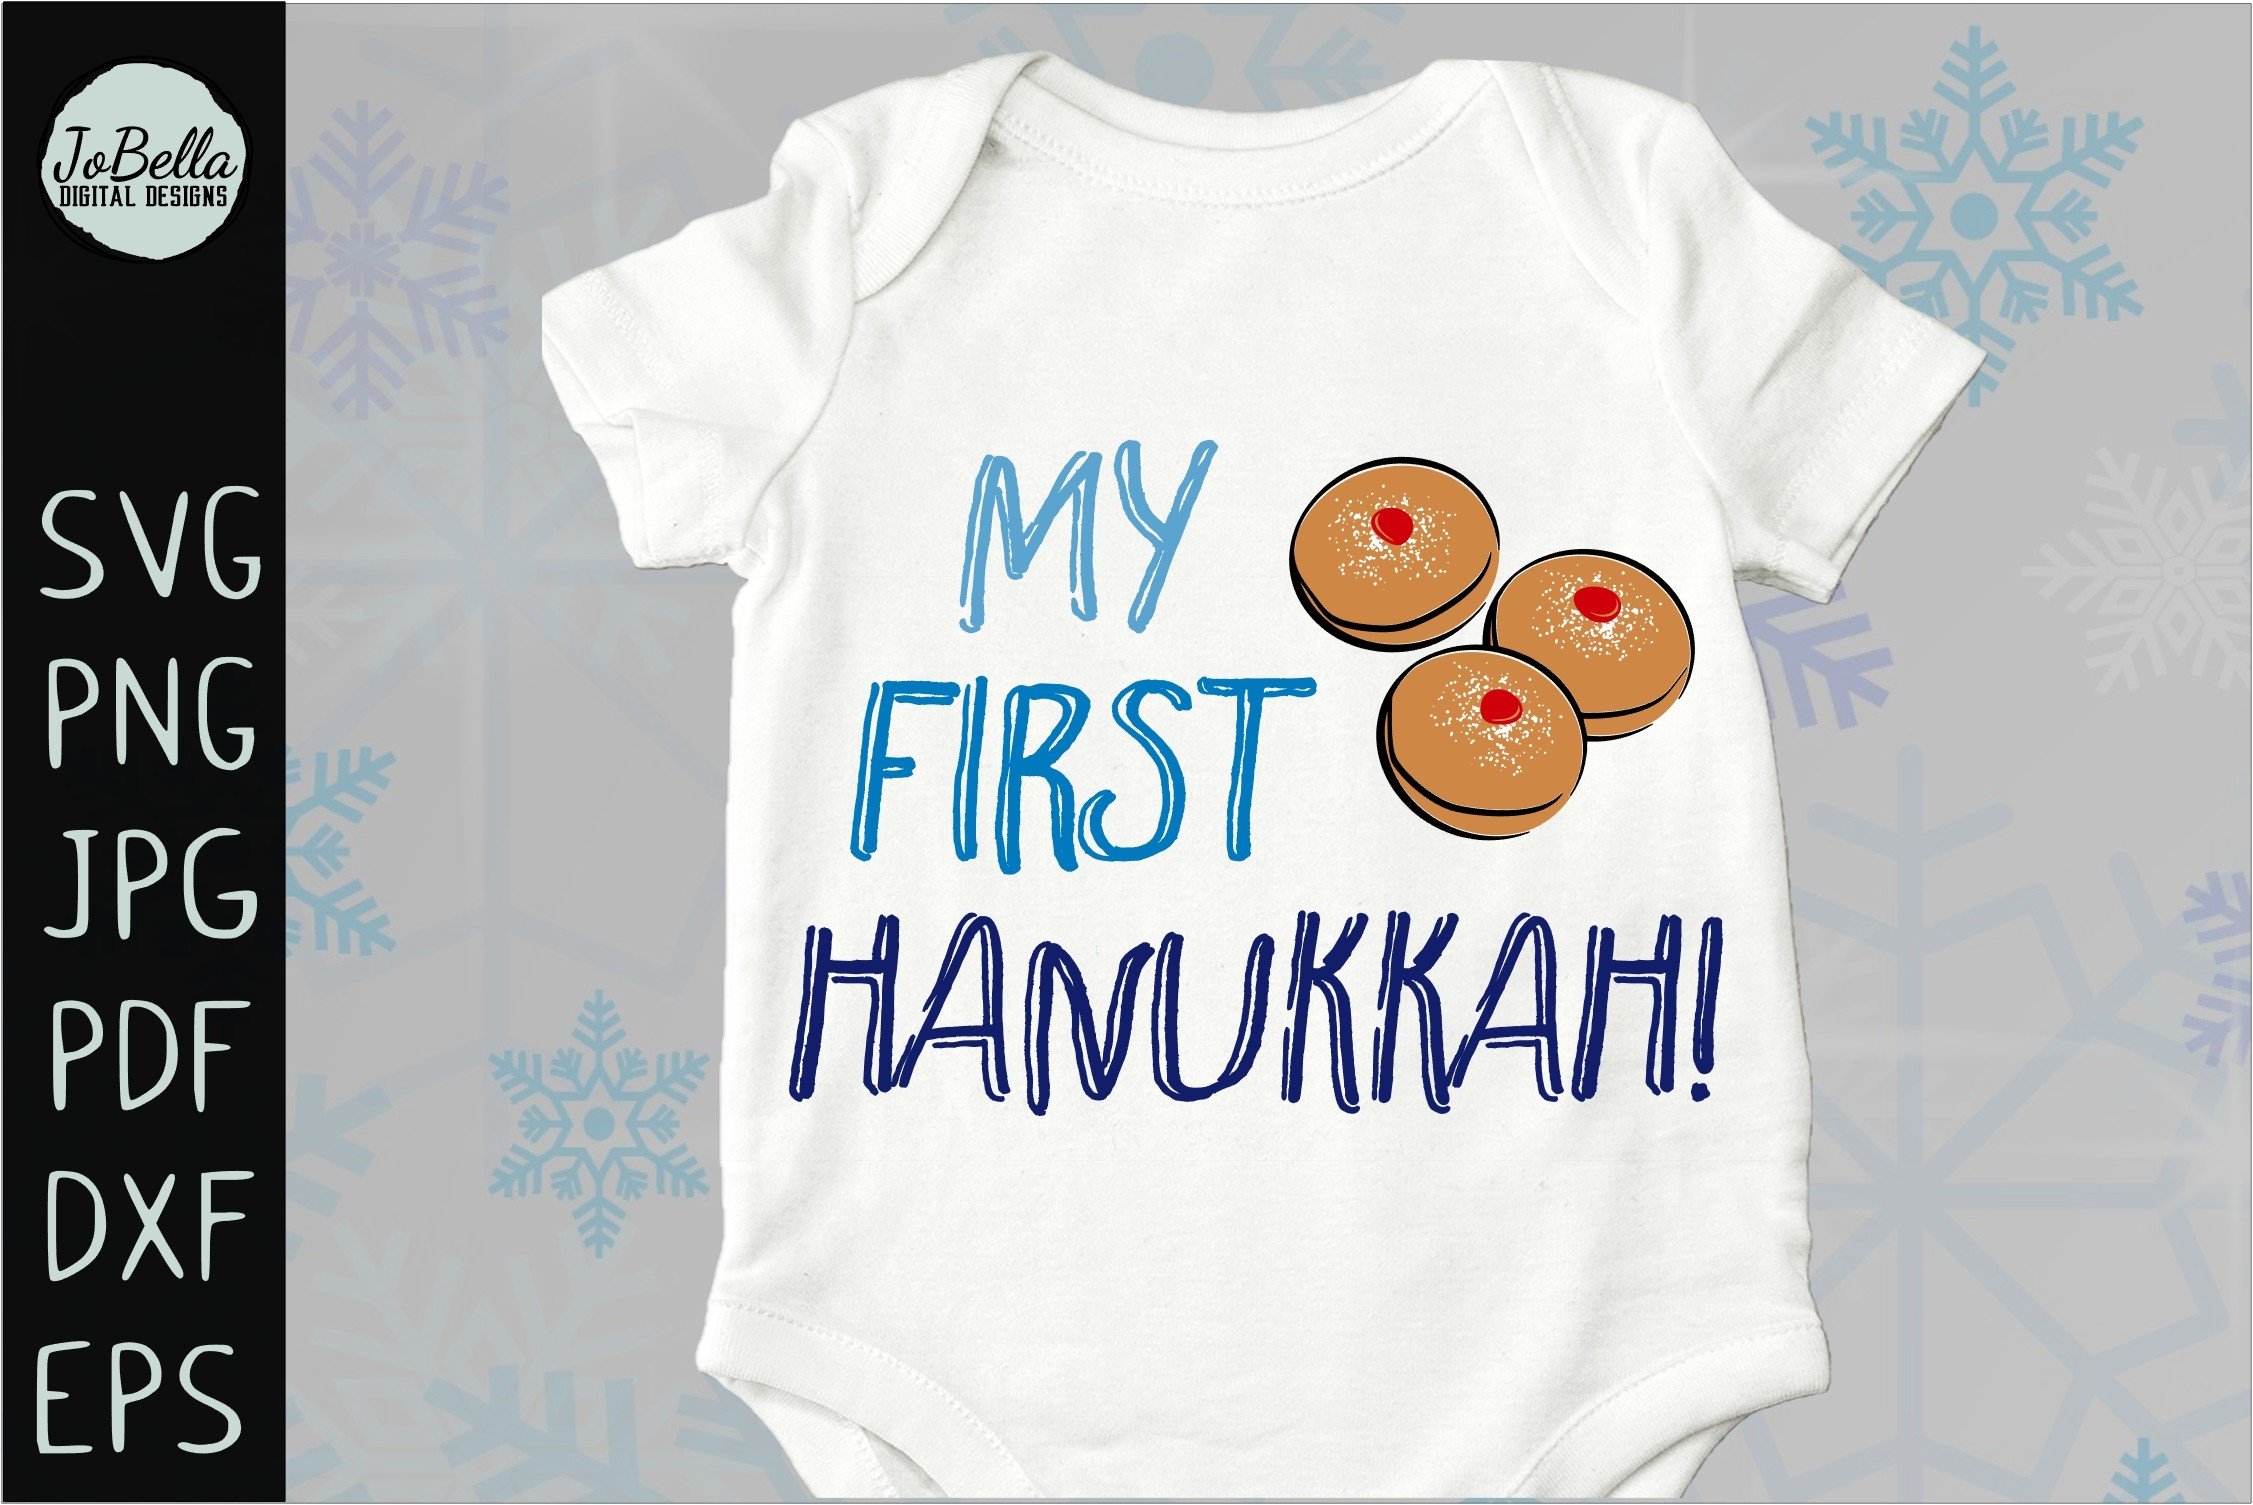 White baby bodysuit with the lettering "My first Hanukkah!".